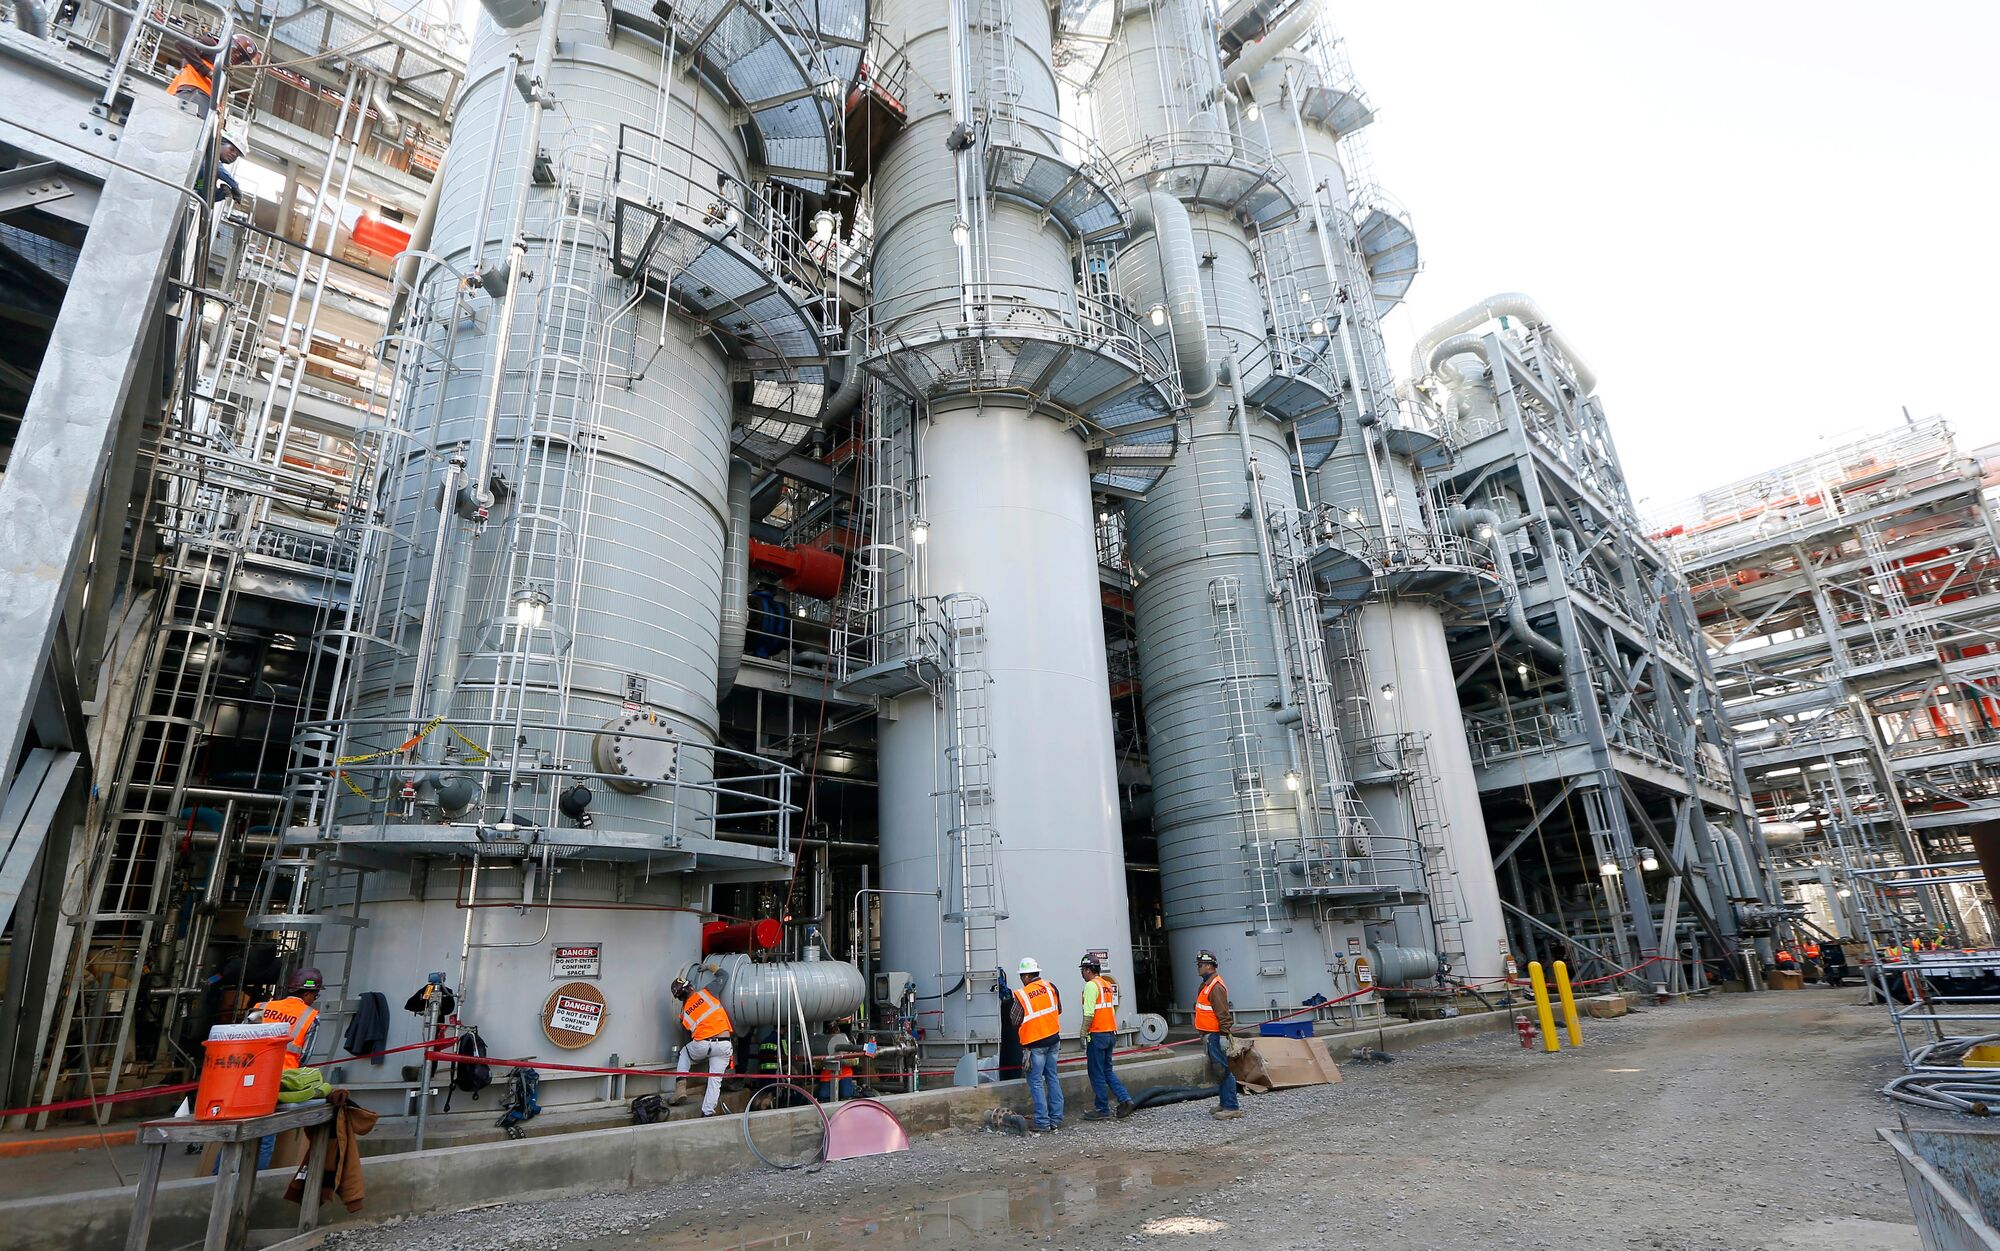 Employees work on a section of the Mississippi Power Co. carbon capture plant in DeKalb, Miss. (Rogelio V. Solis / AP)